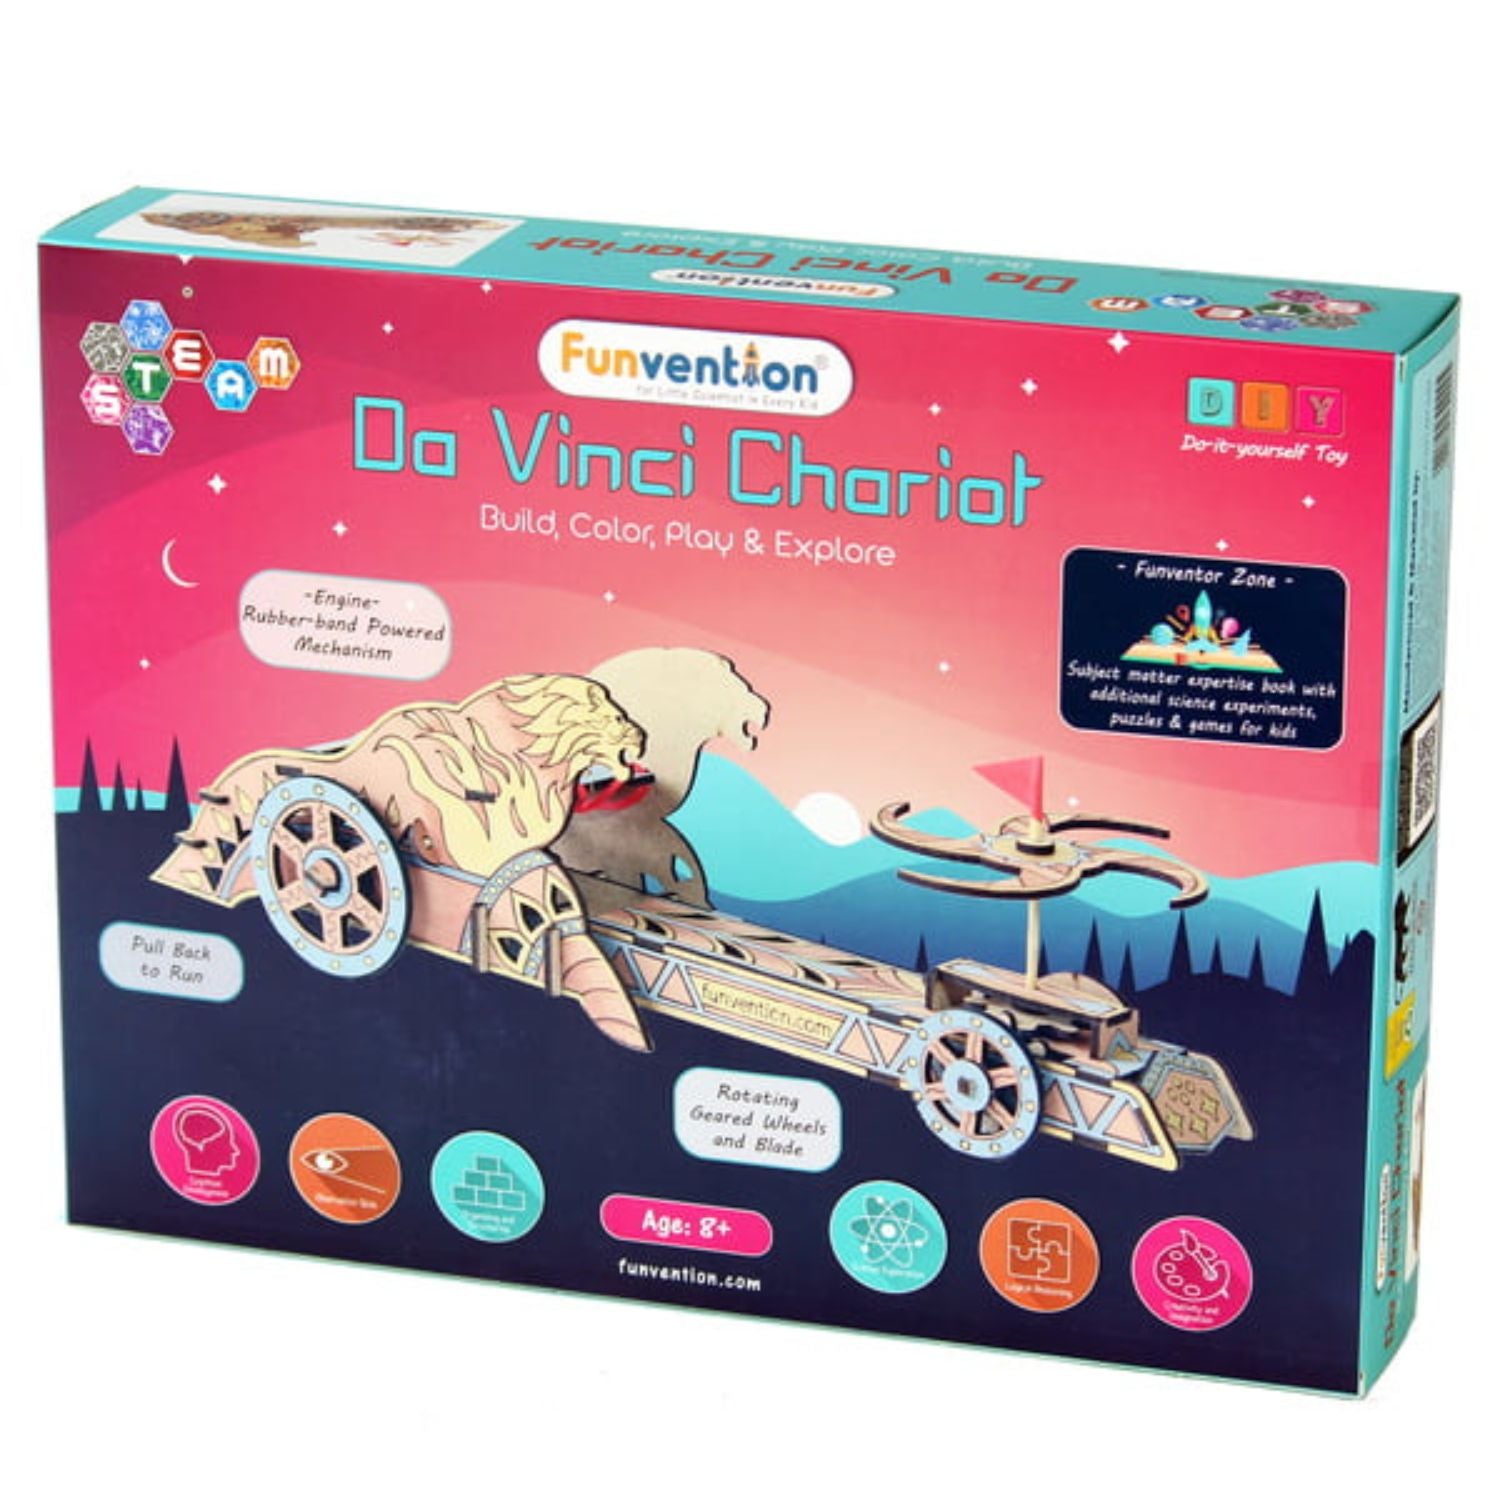 Brain game Funvention Pull-Back STEM Mechanical Da Vinci Chariot DIY Kit: Create 3D Wooden Chariot, Rotating Geared Blades, Brain & Activity Game Age 8+ Years